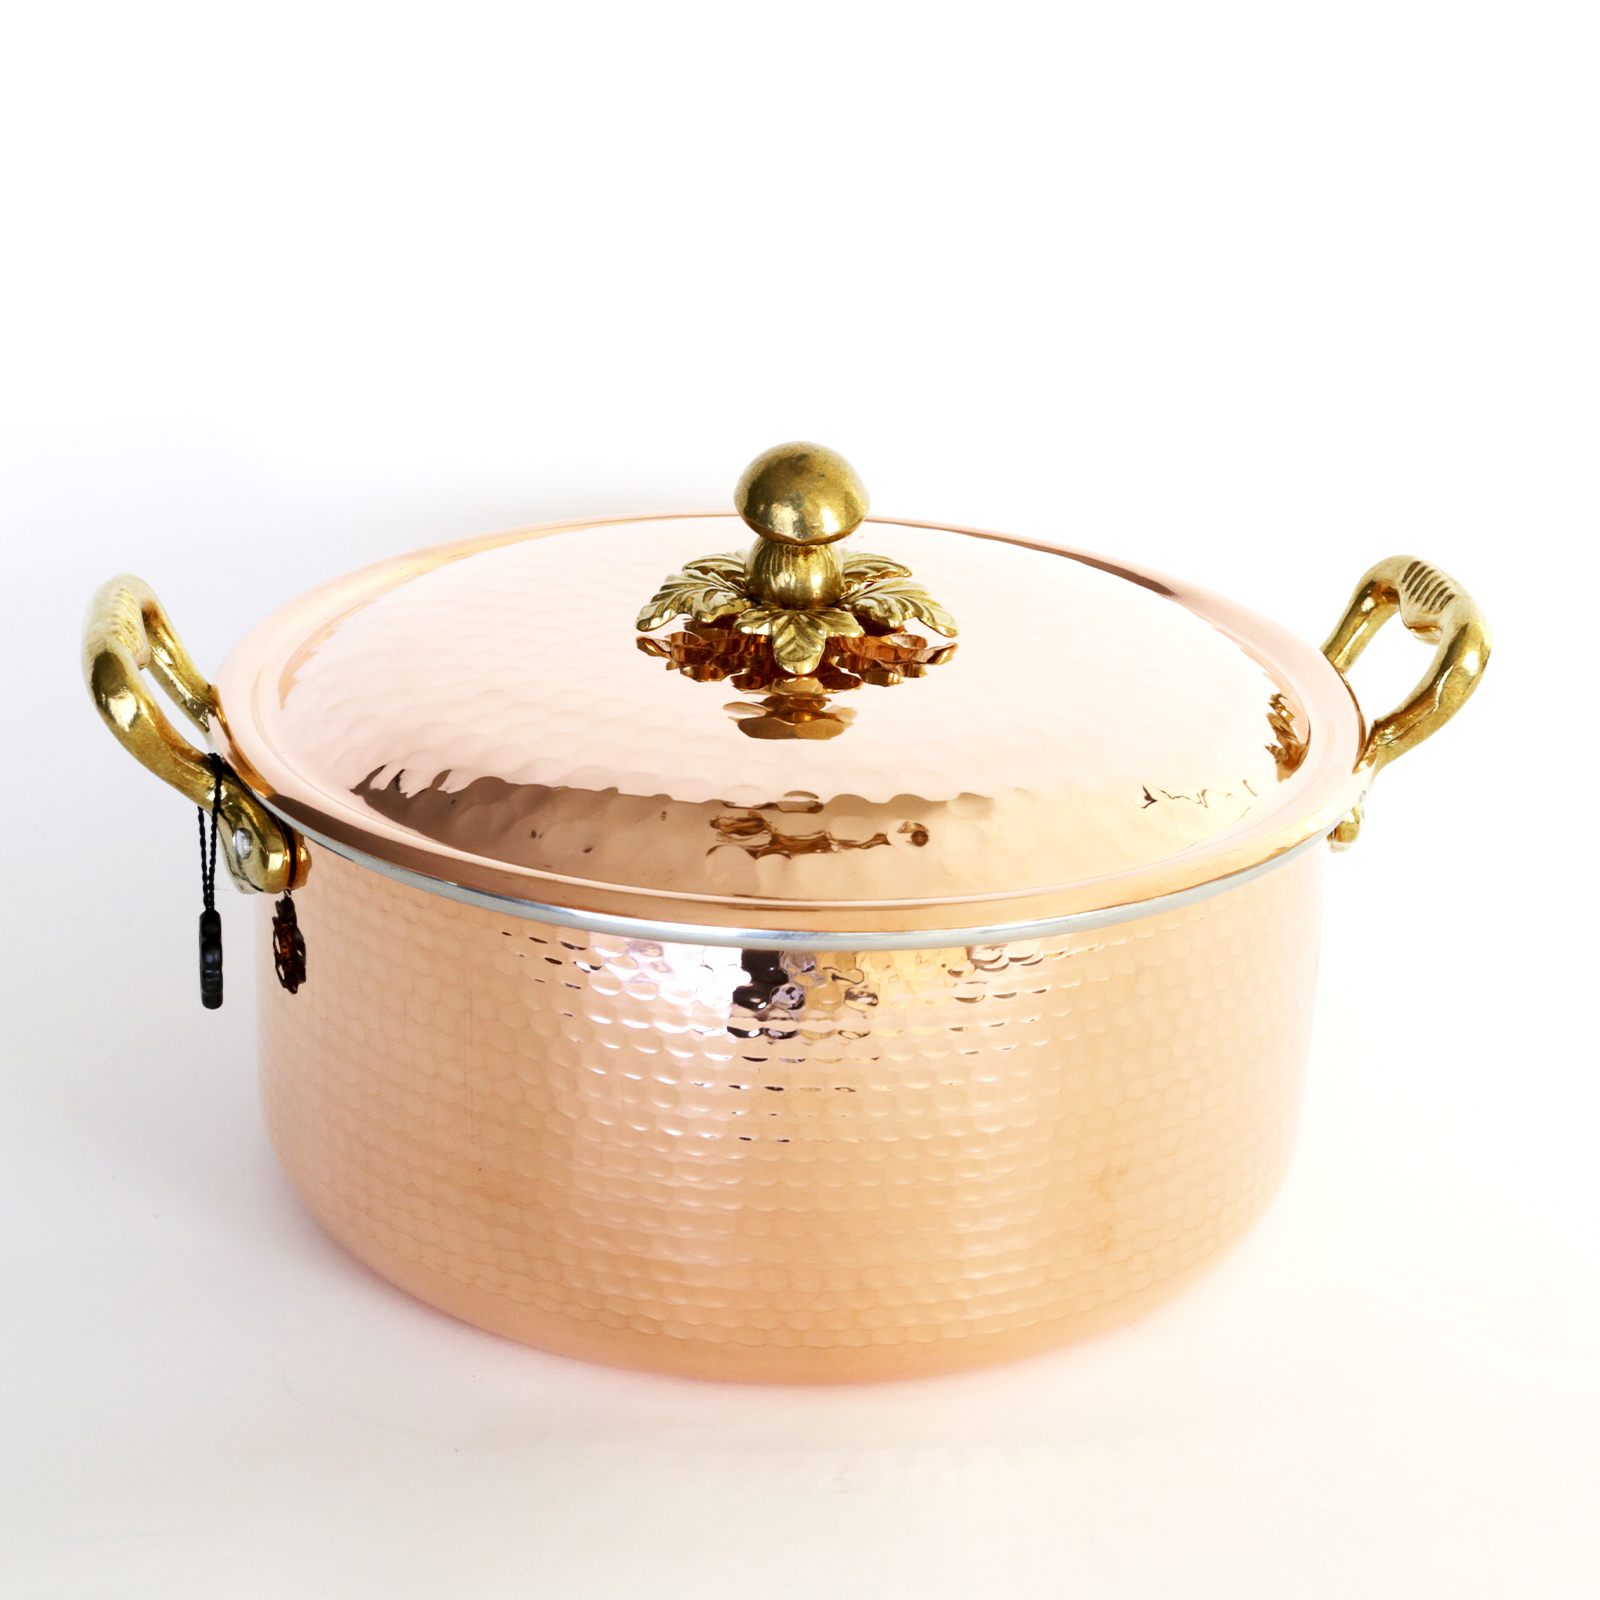 Tinned copper stock pot with lid – Cuisine Romefort